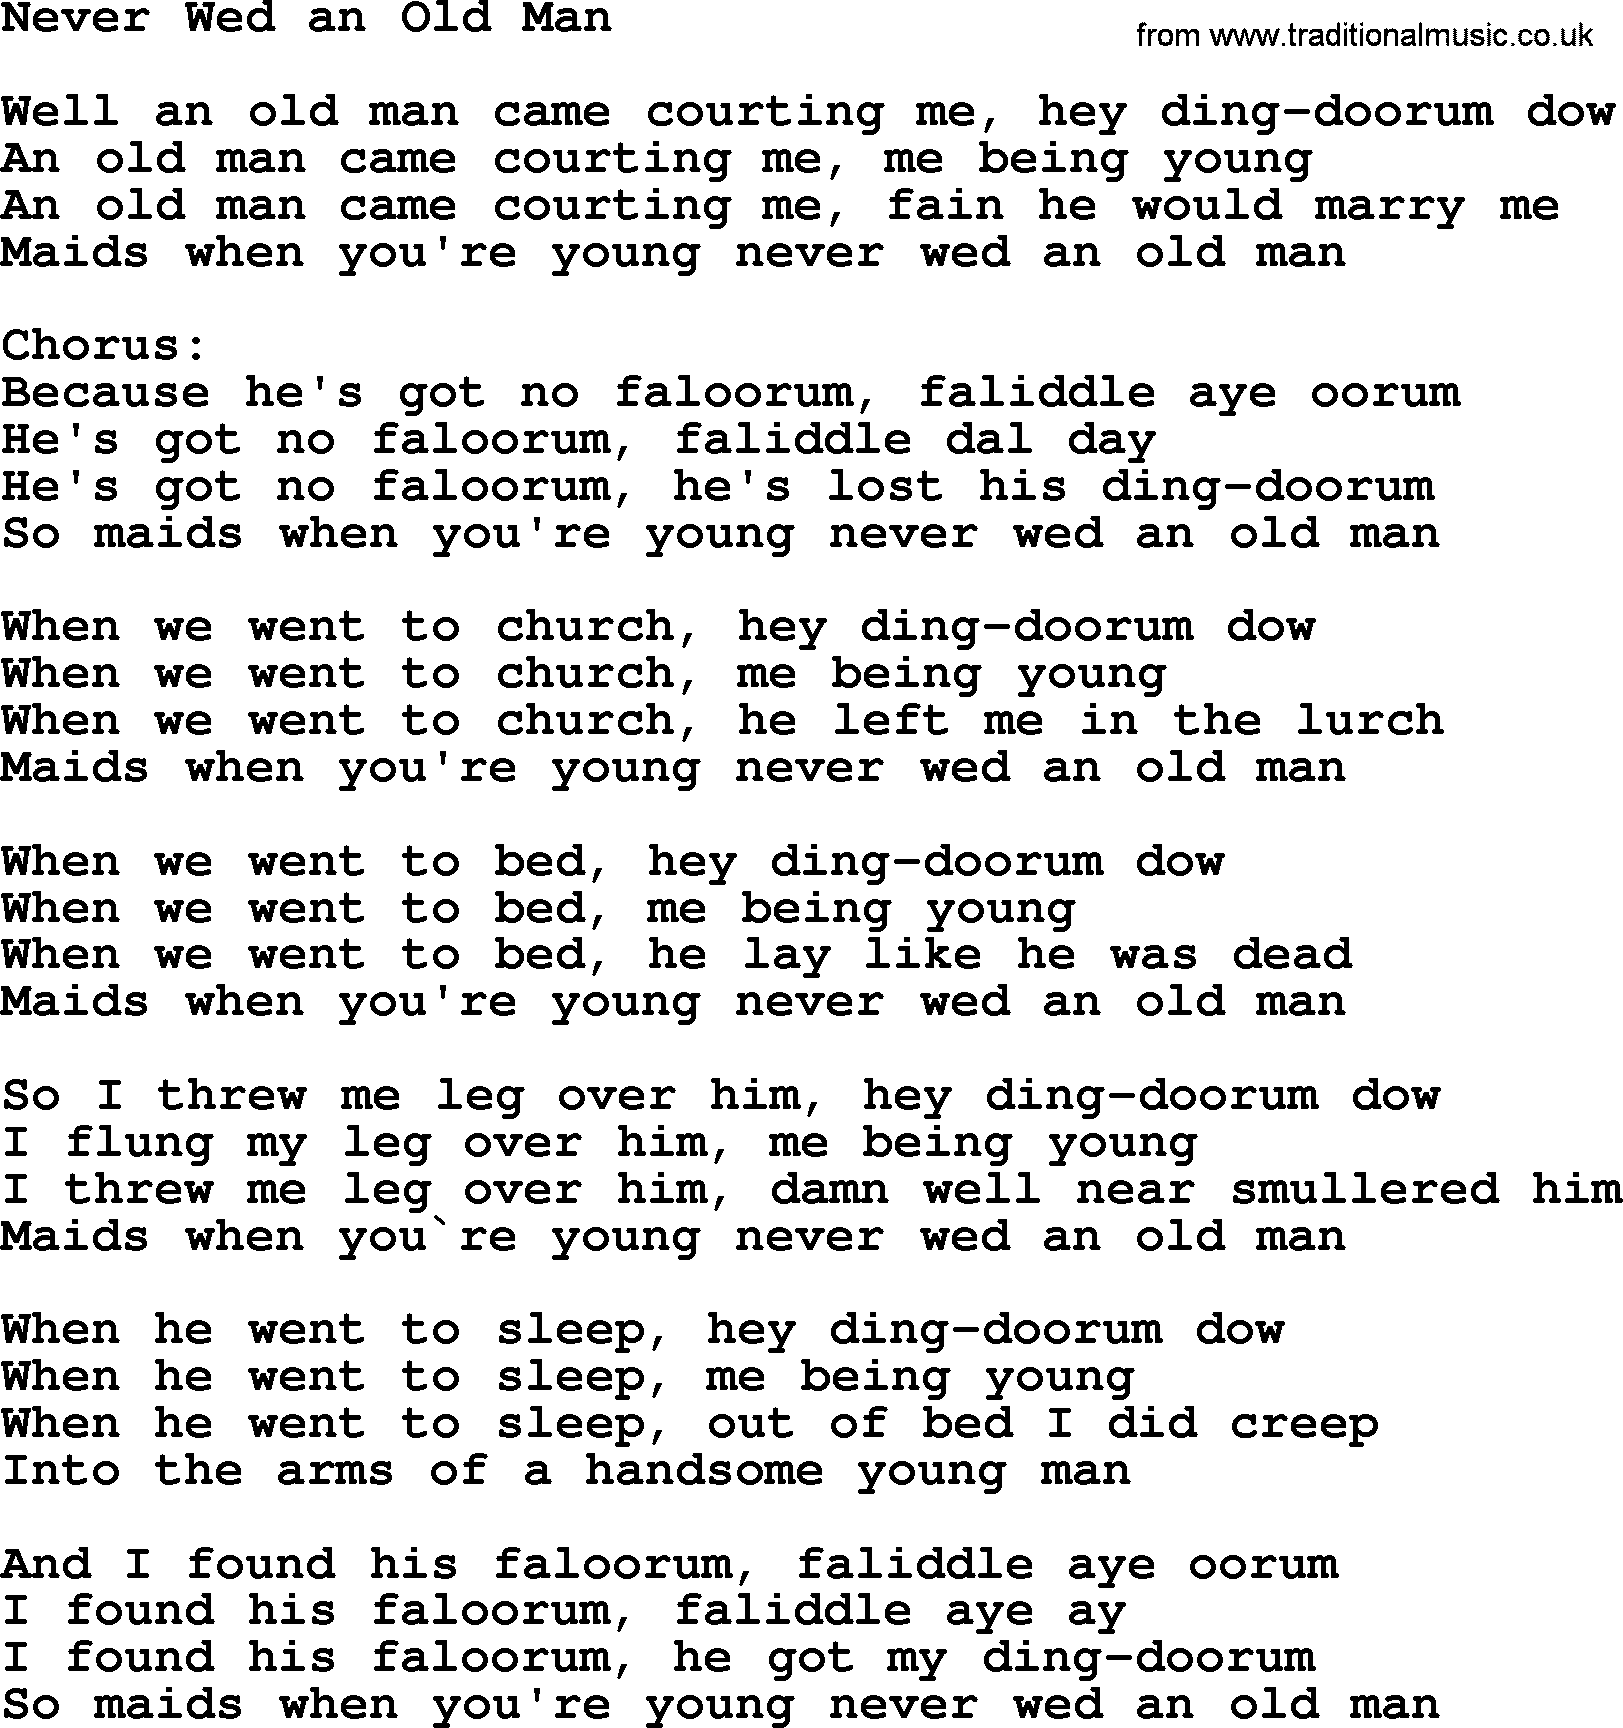 The Dubliners song: Never Wed An Old Man, lyrics